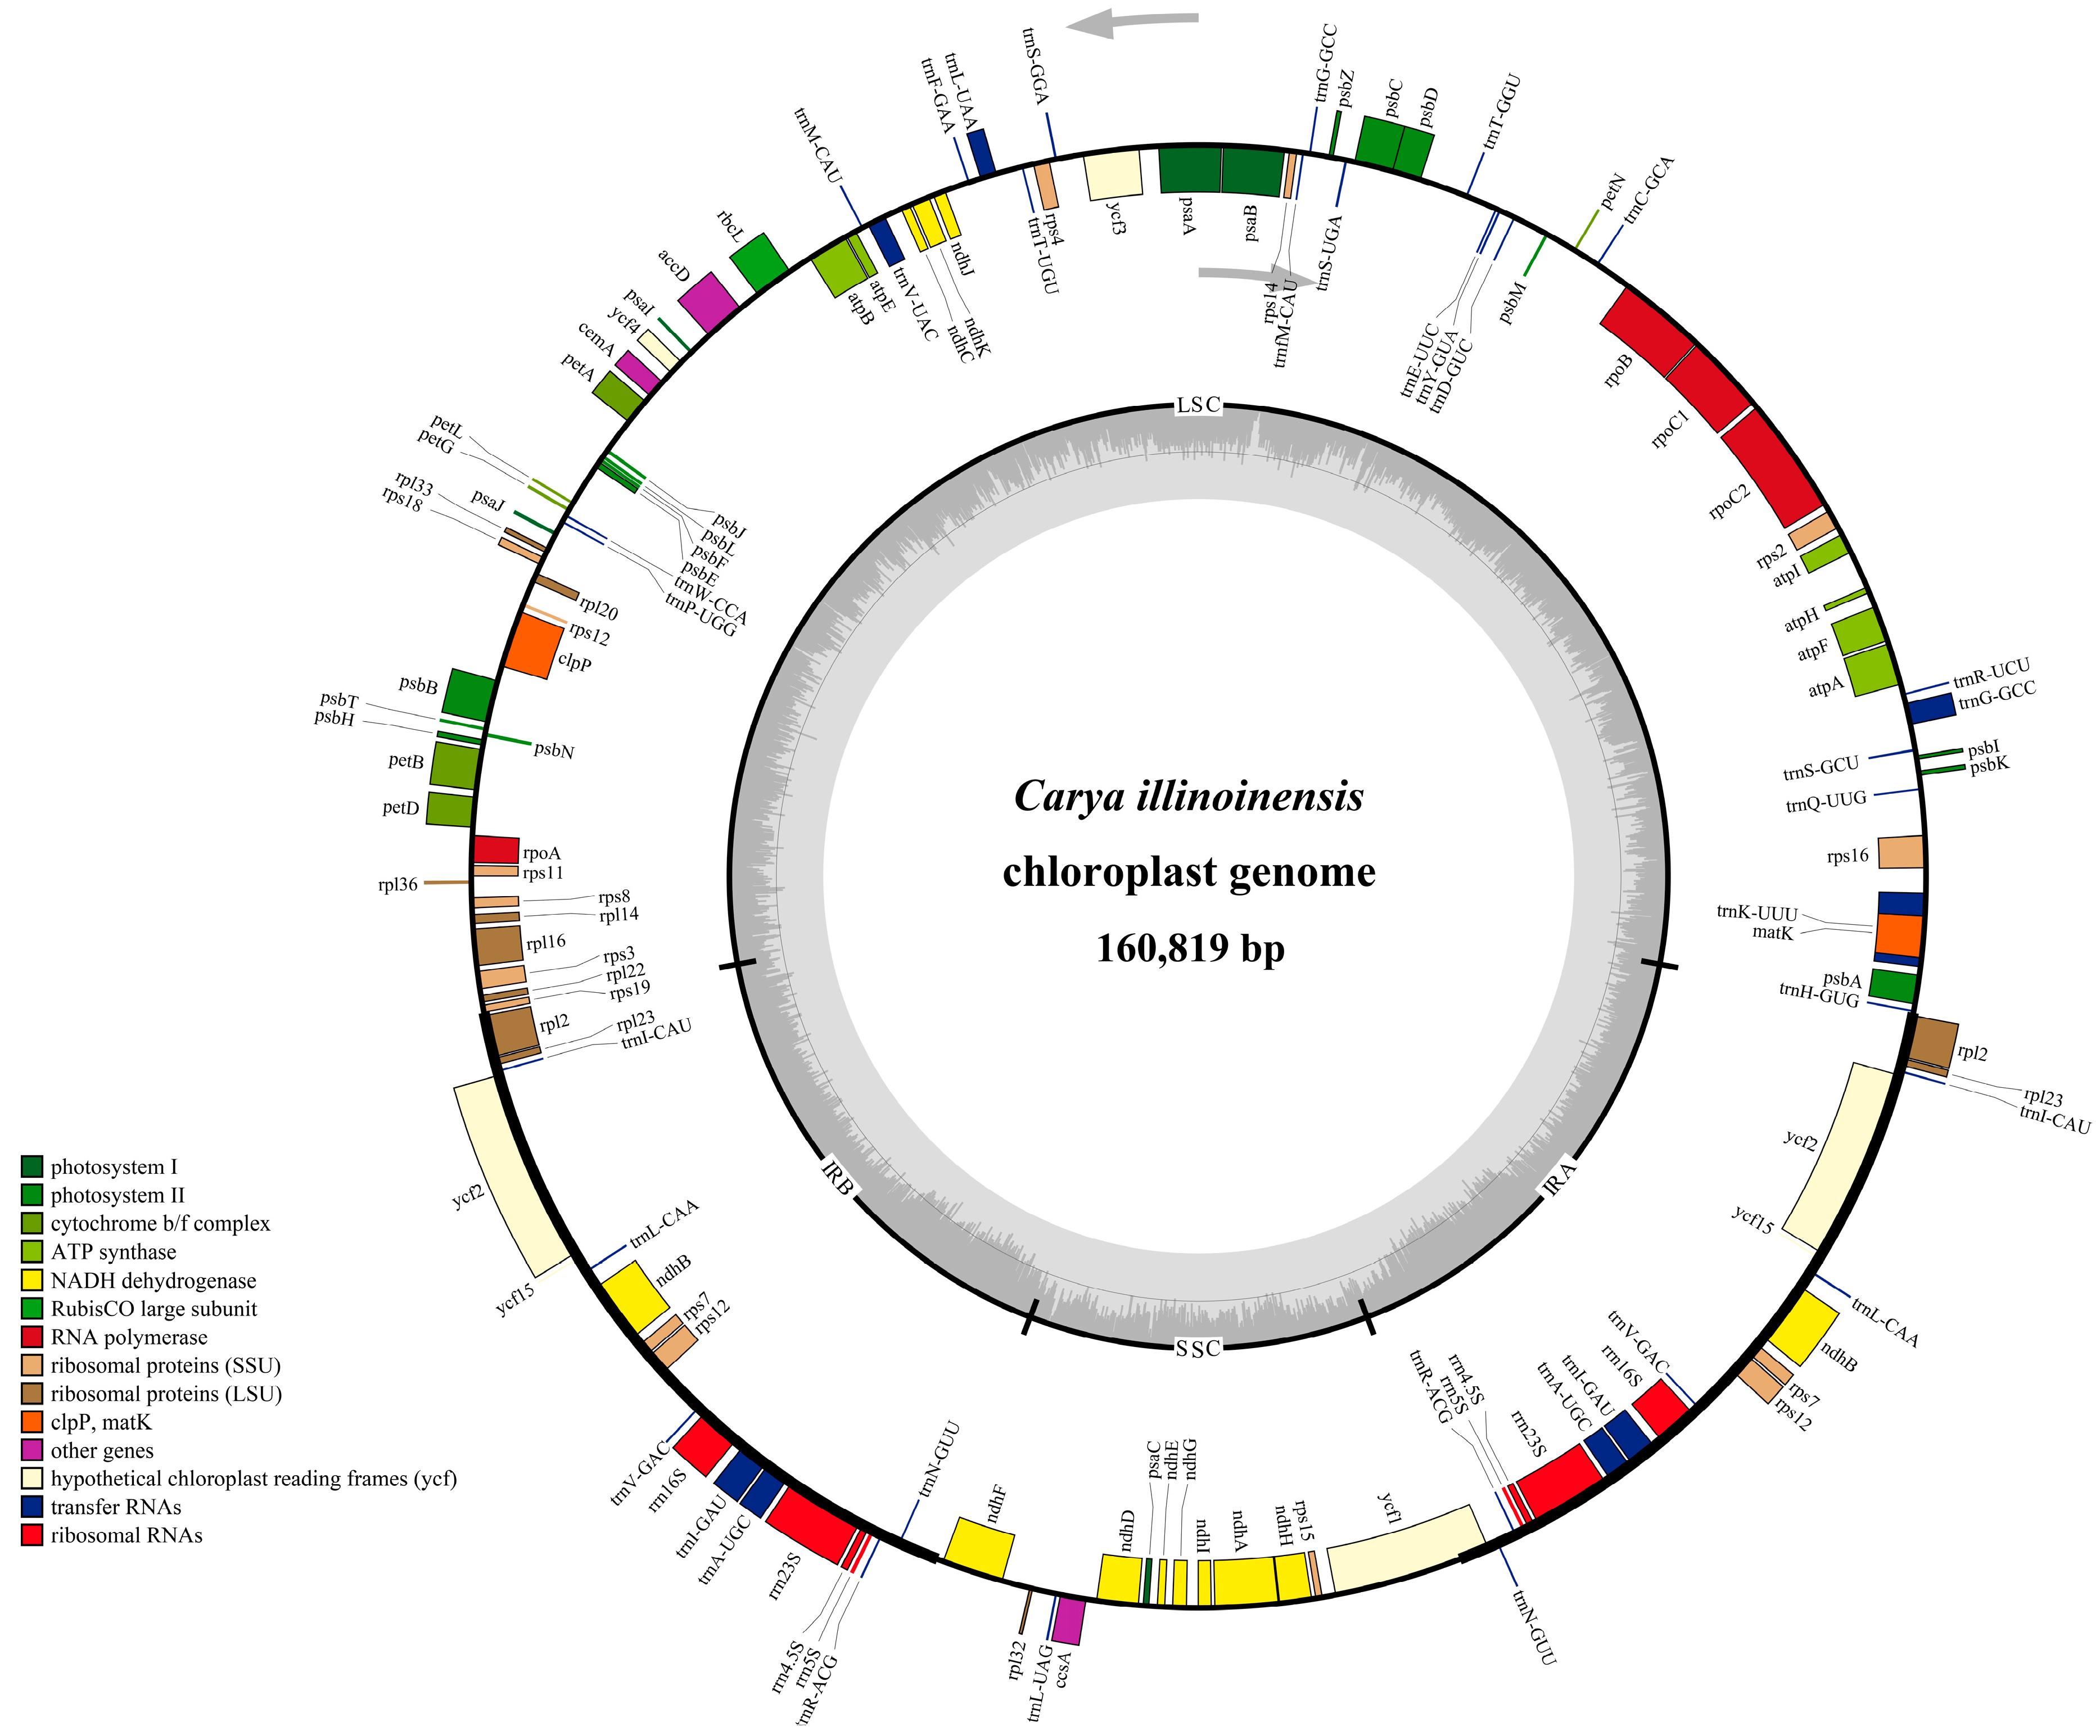 Forests | Free Full-Text | The Chloroplast Genome of Carya illinoinensis:  Genome Structure, Adaptive Evolution, and Phylogenetic Analysis | HTML